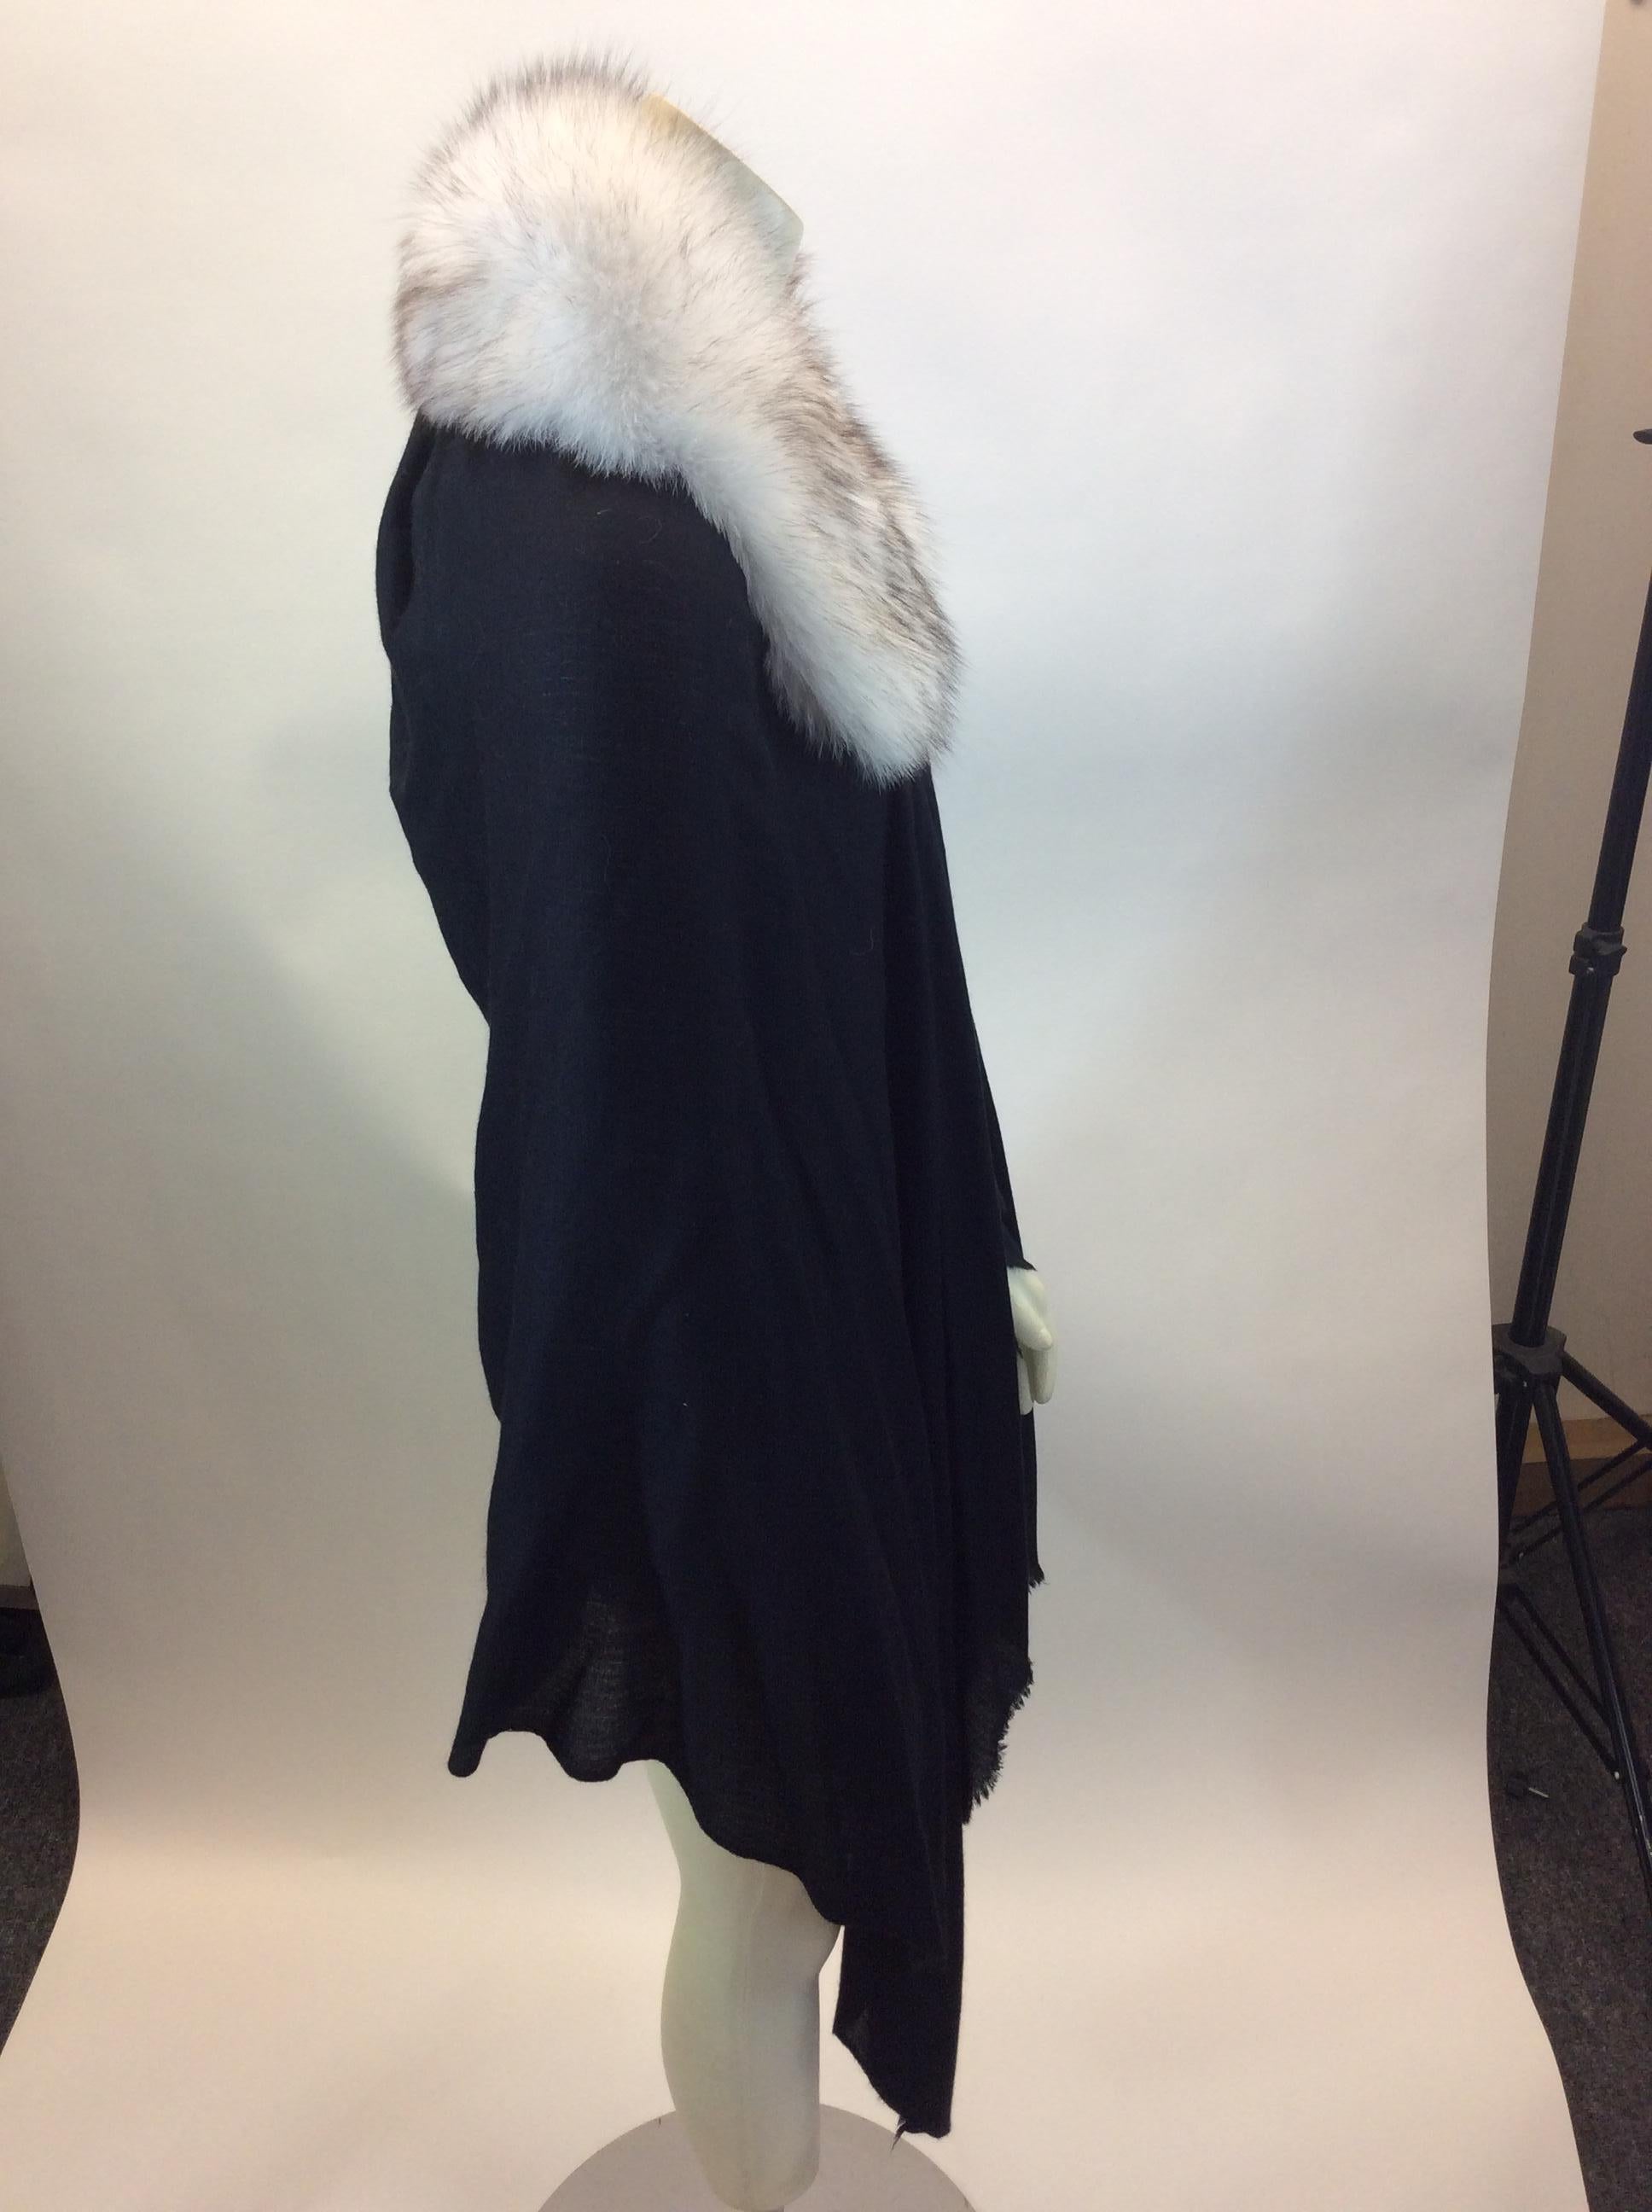 Women's Anna Irion Black Shawl with Fur Collar NWT For Sale